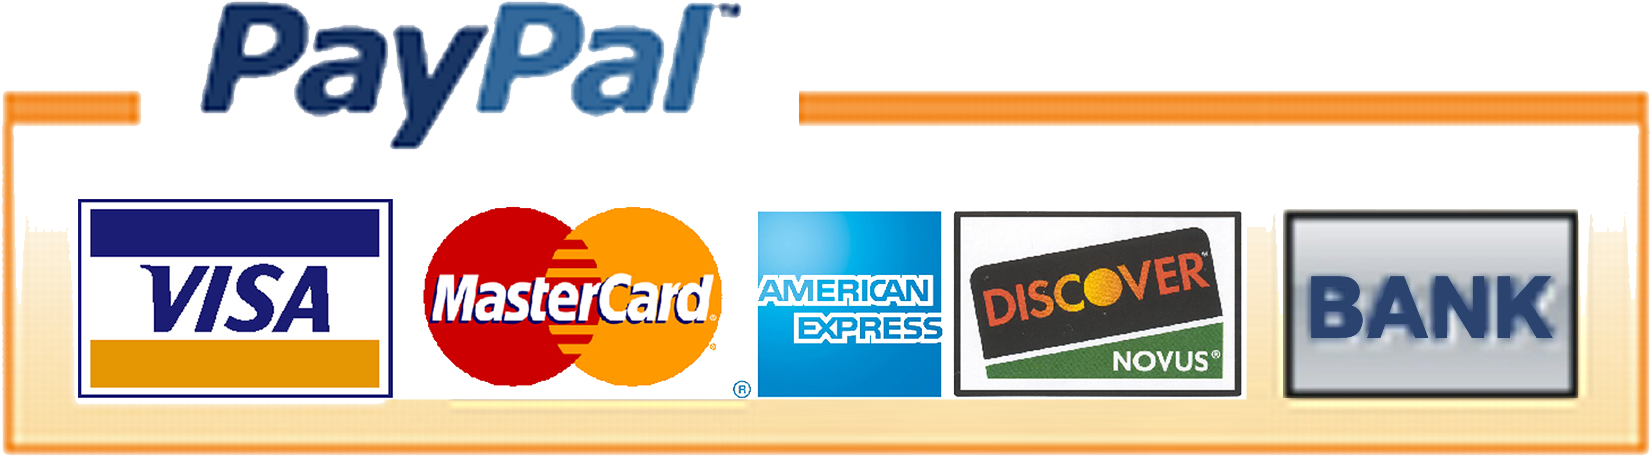 Payment Options Pay Pal Visa Master Card American Express Discover PNG image